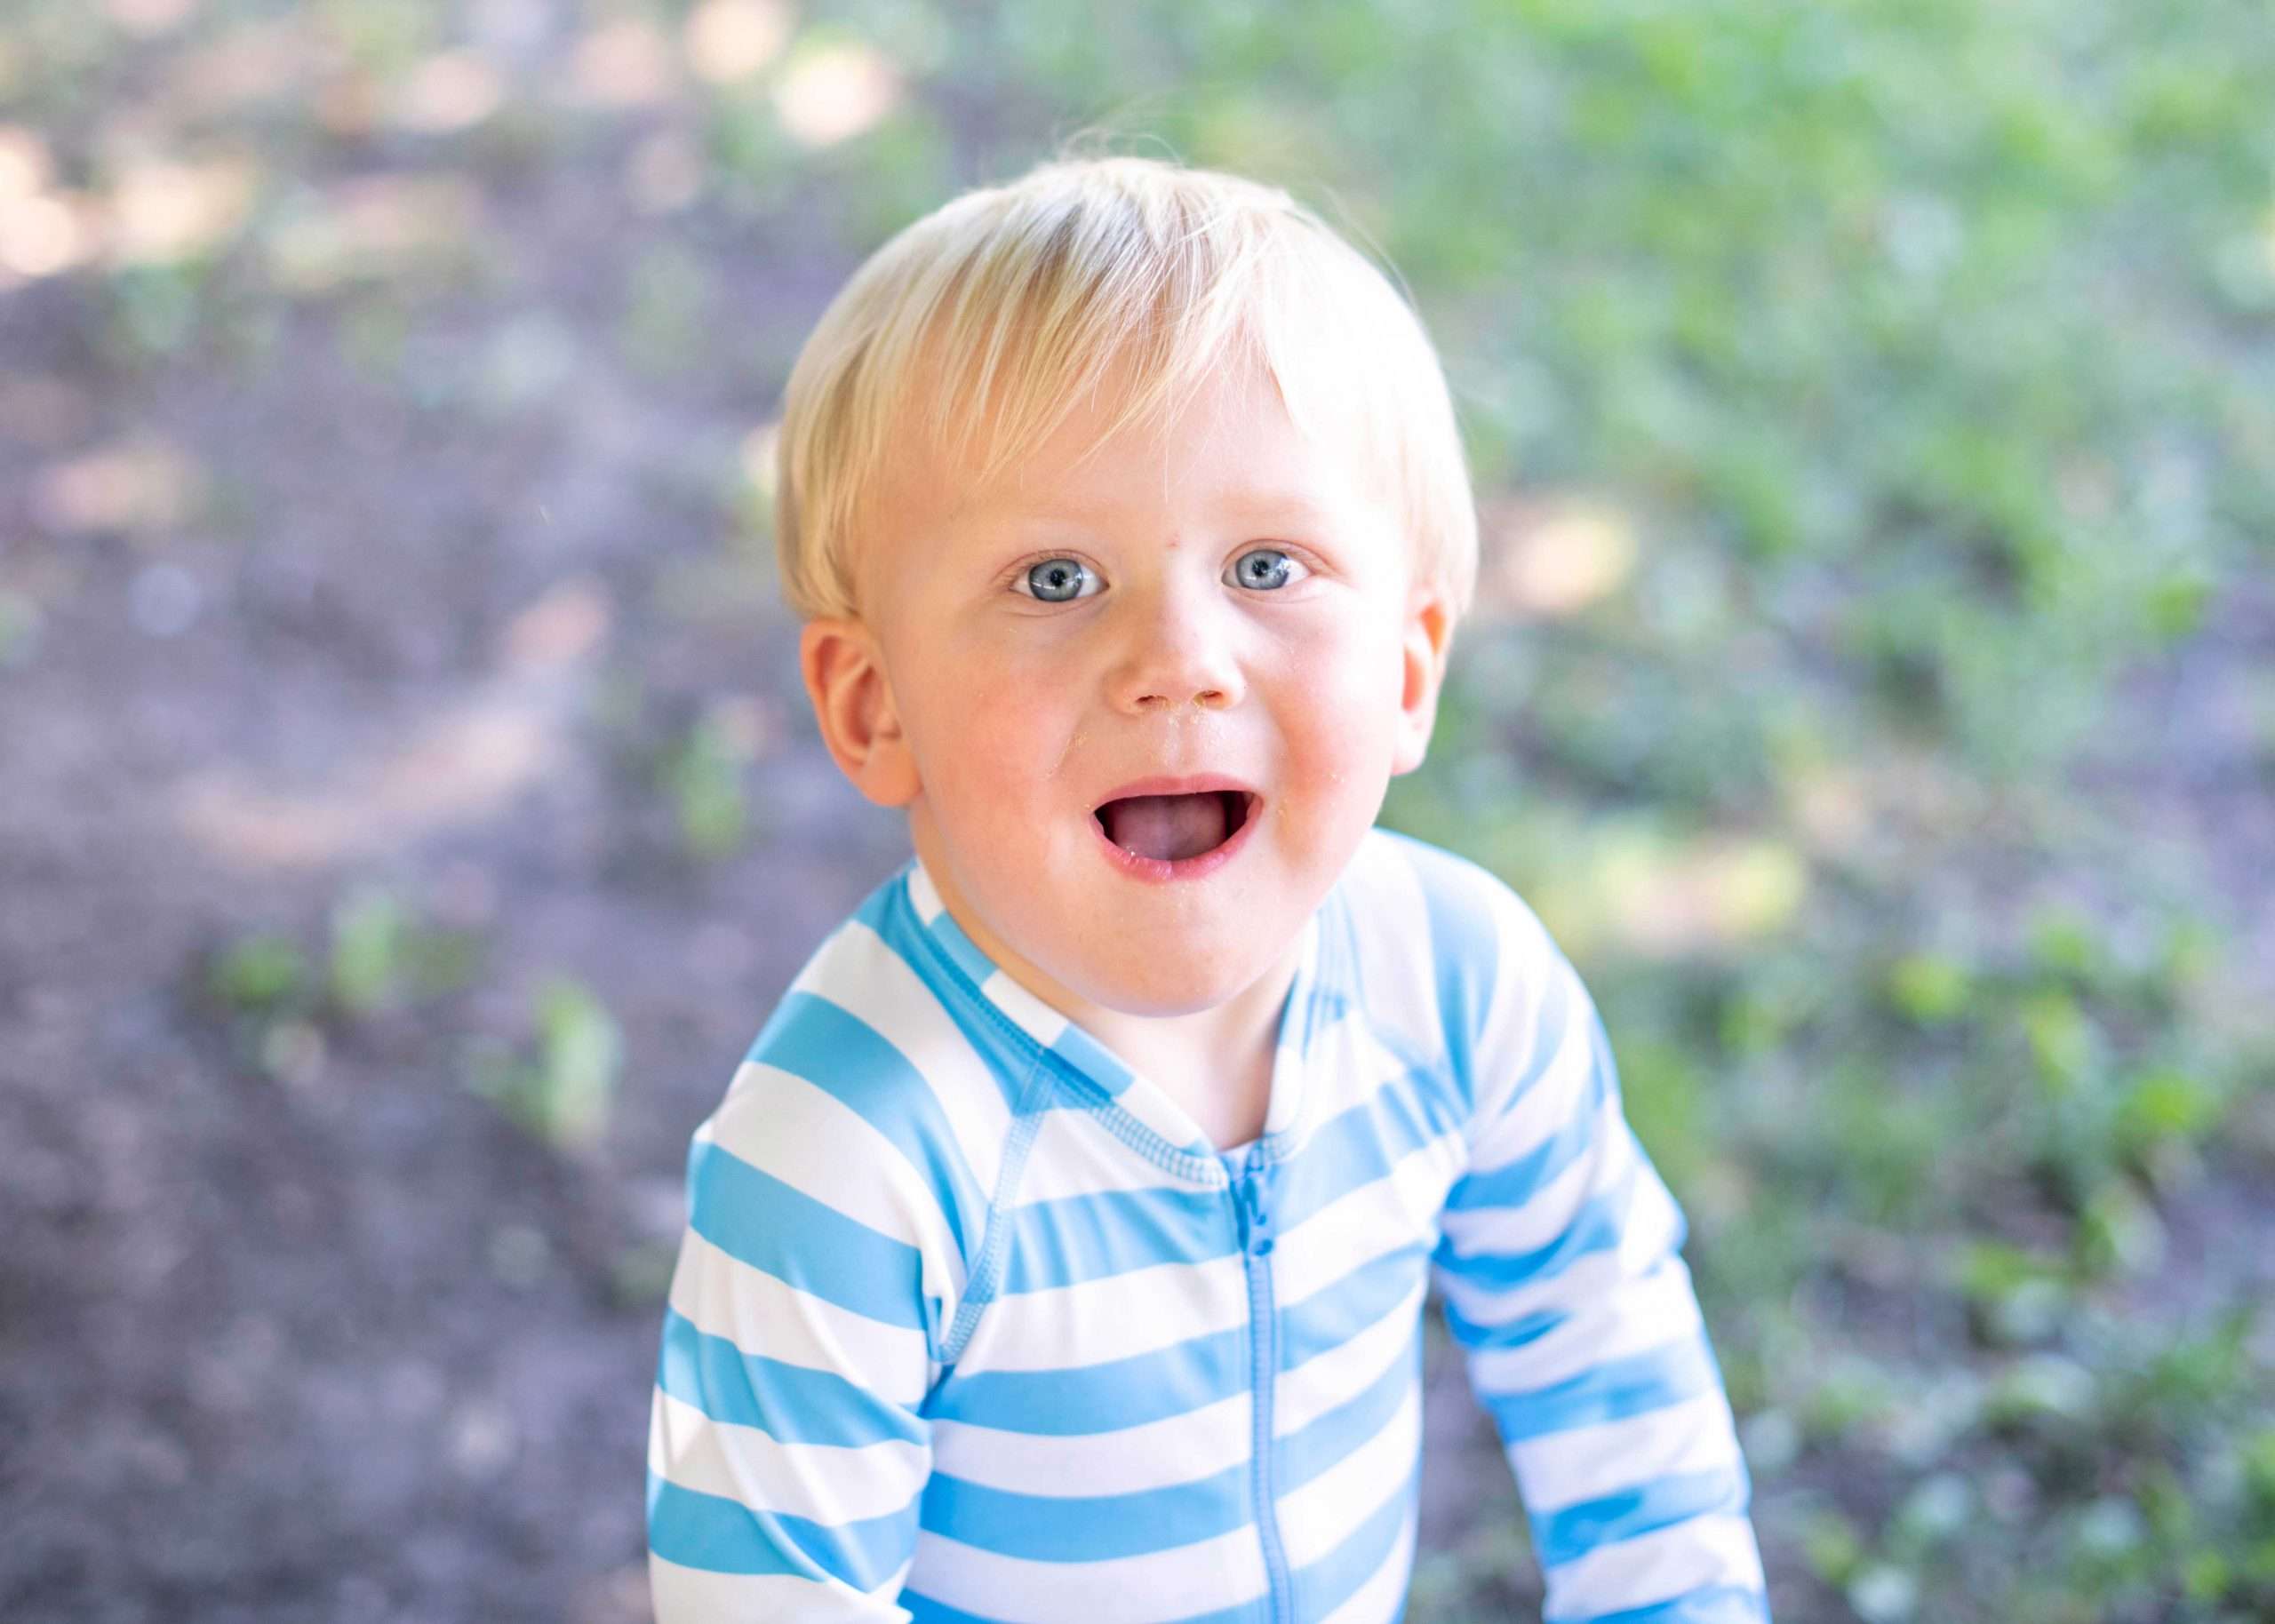 Smiling toddler looking up at the camera. They're wearing a striped blue onesie.